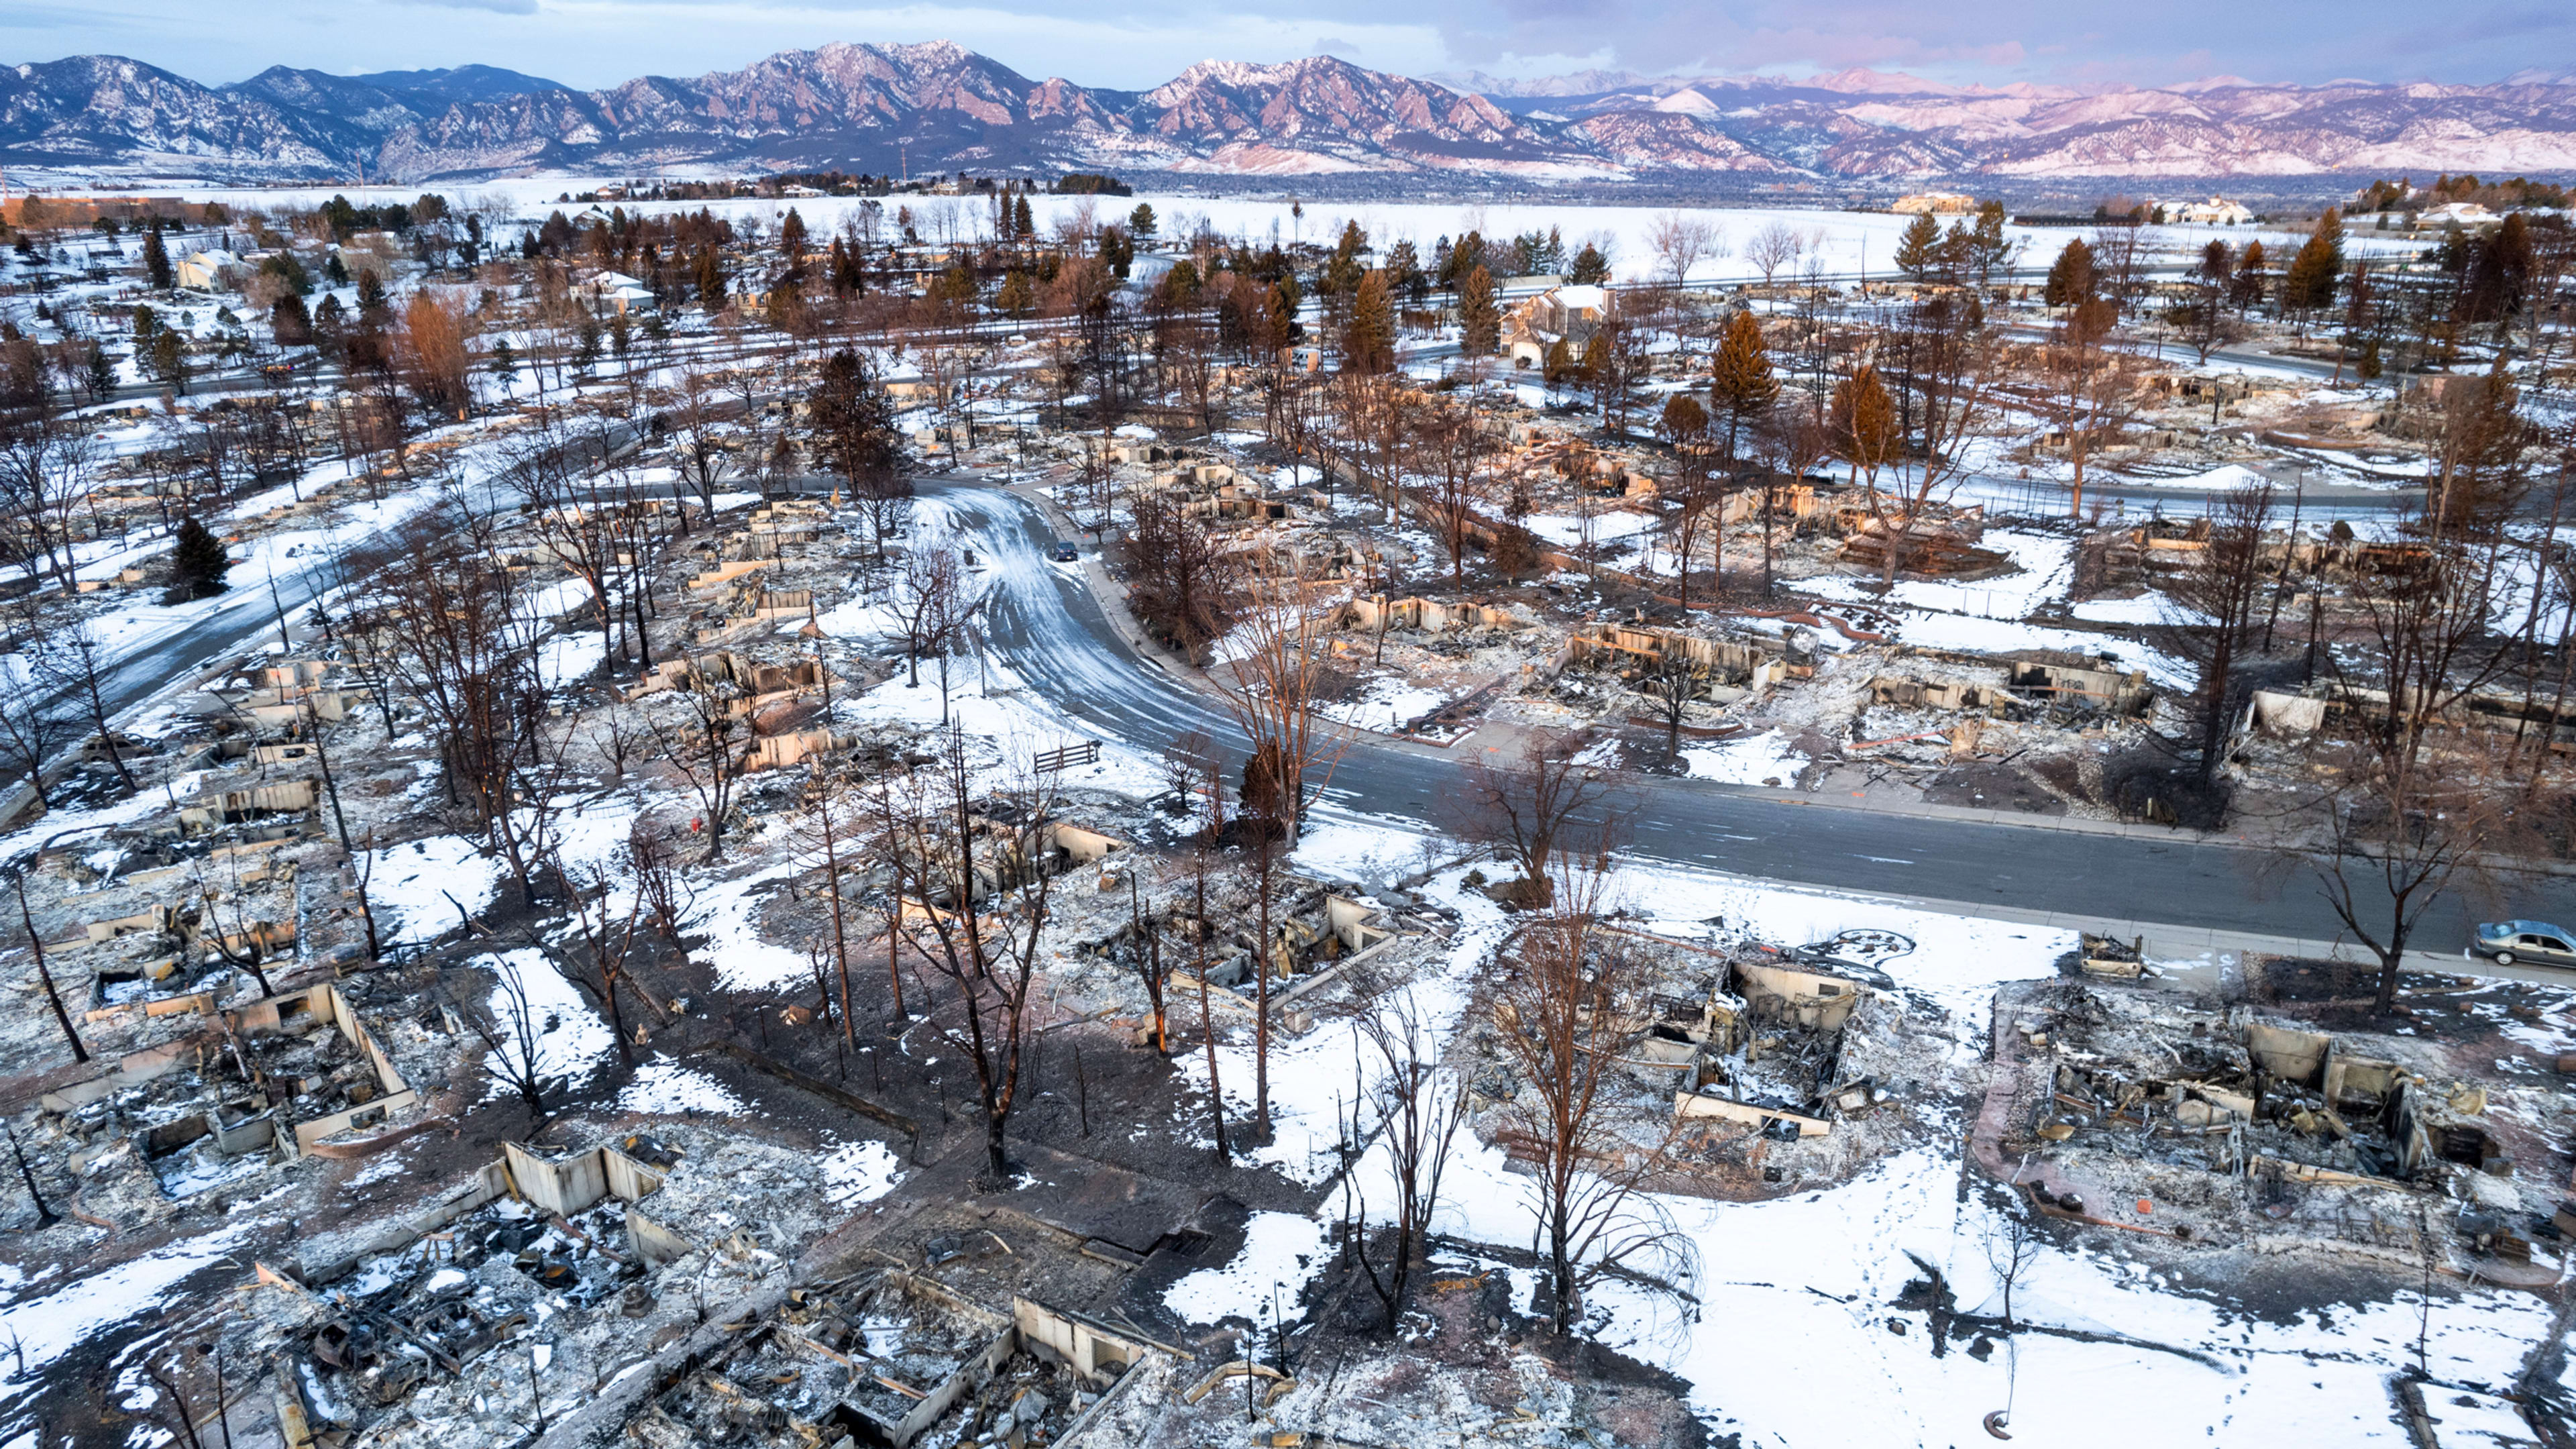 9 incredibly practical ways to protect your home from a wildfire